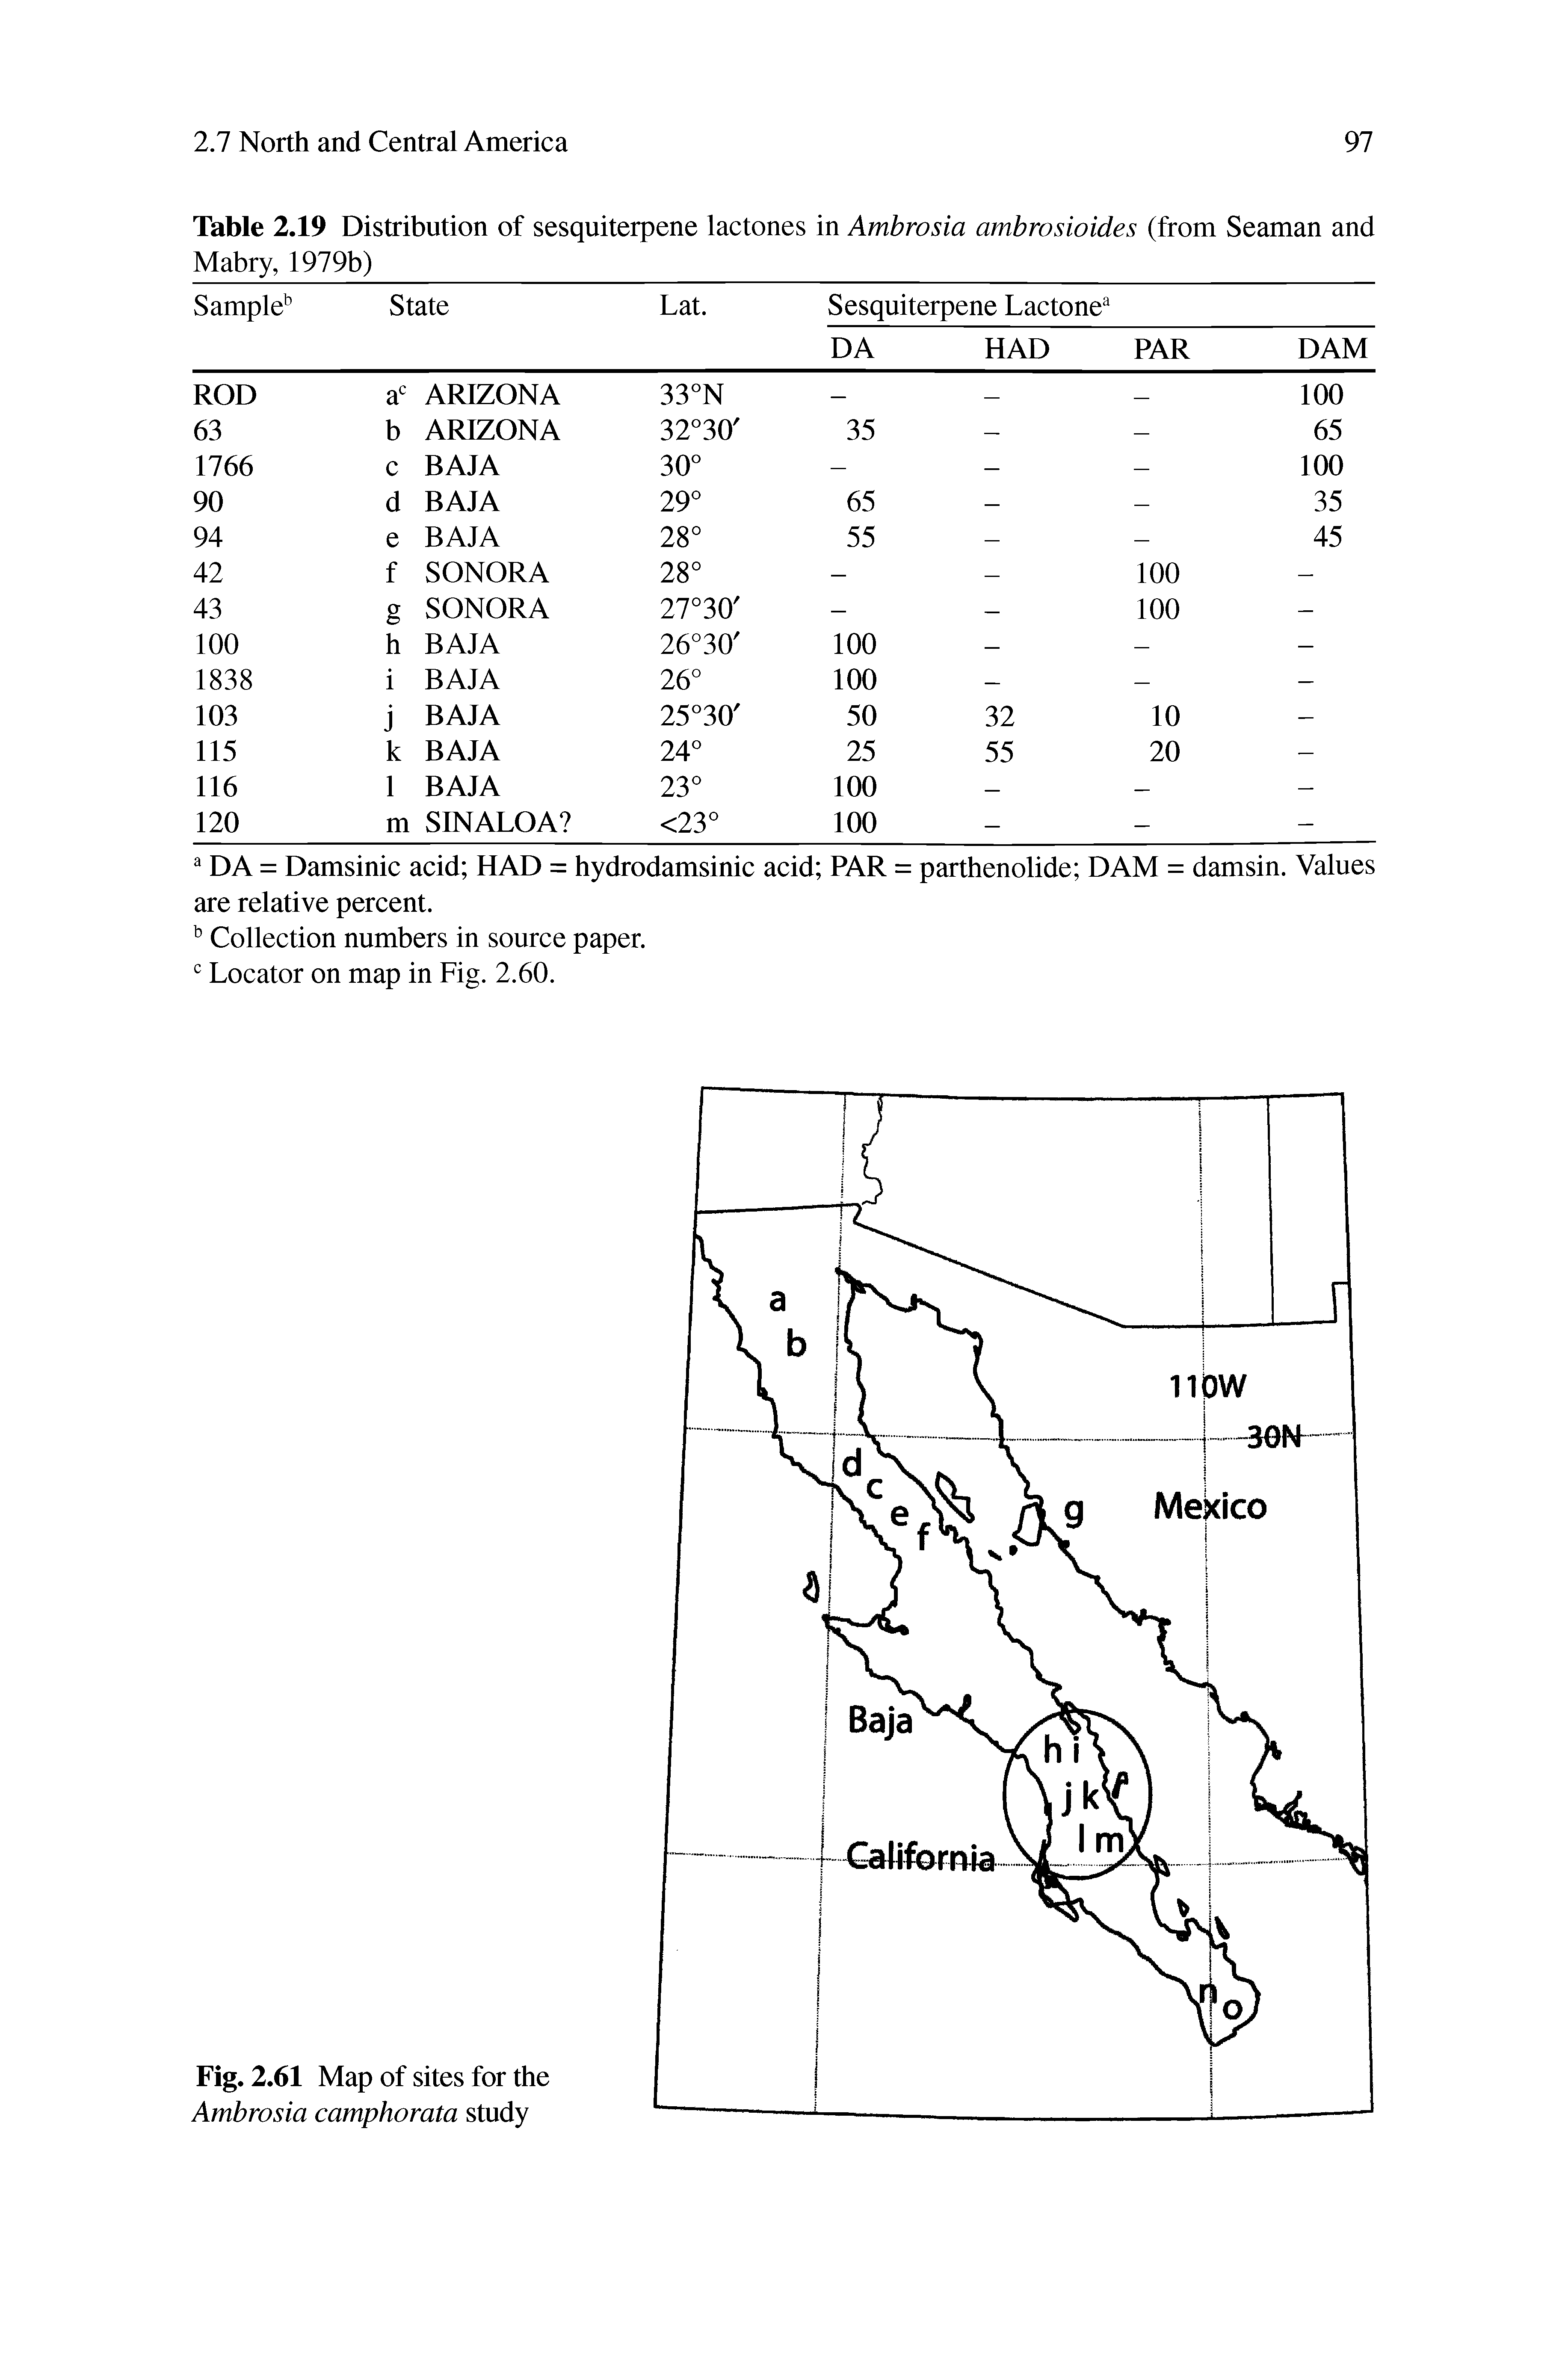 Table 2.19 Distribution of sesquiterpene lactones in Ambrosia ambrosioides (from Seaman and Mabry, 1979b)...